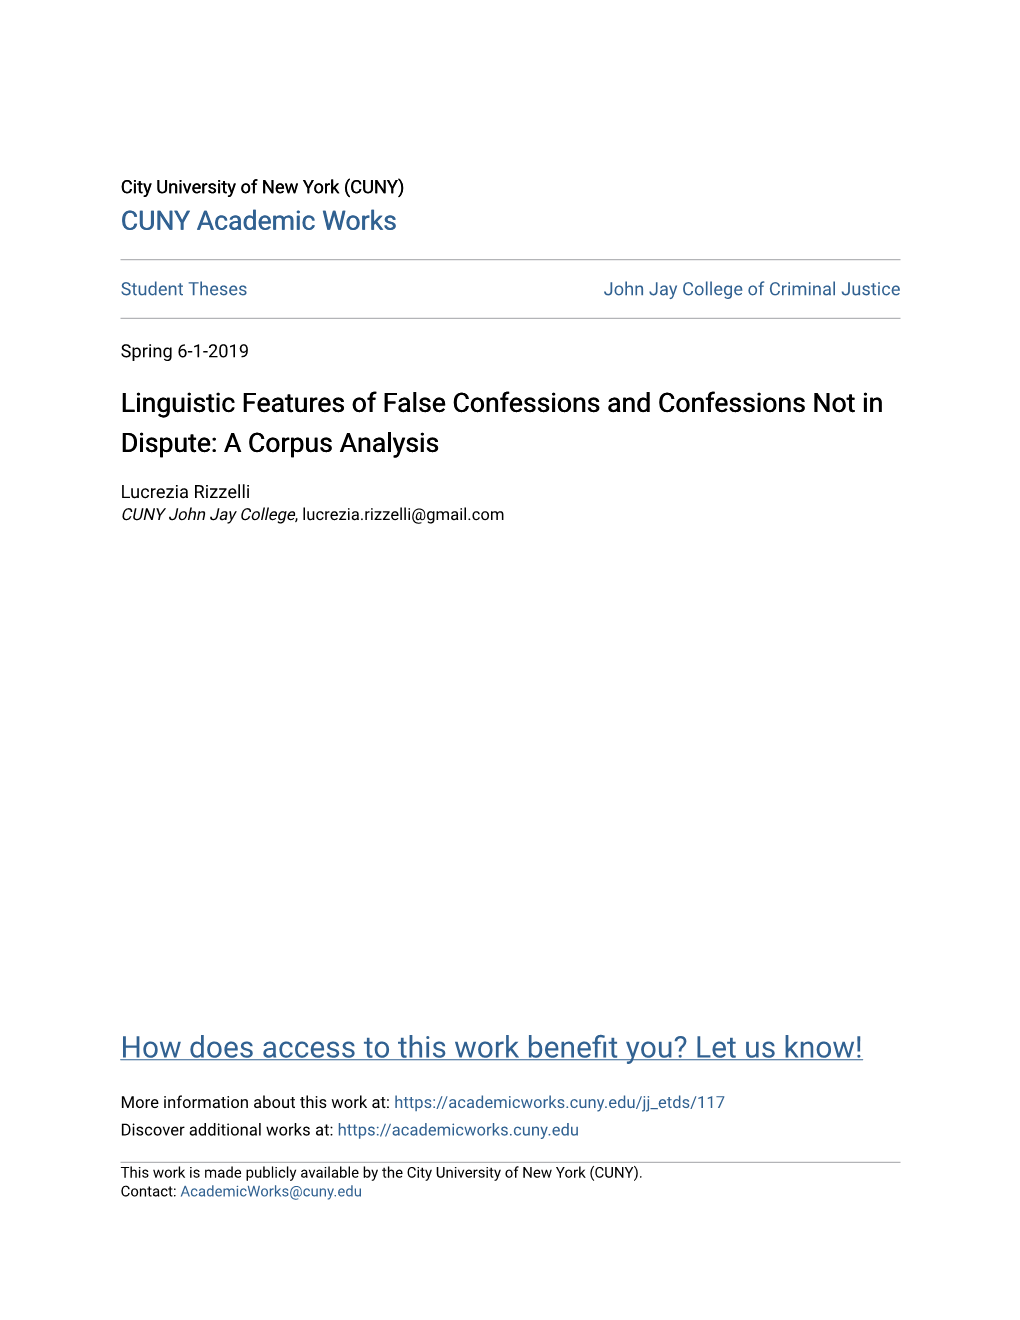 Linguistic Features of False Confessions and Confessions Not in Dispute: a Corpus Analysis